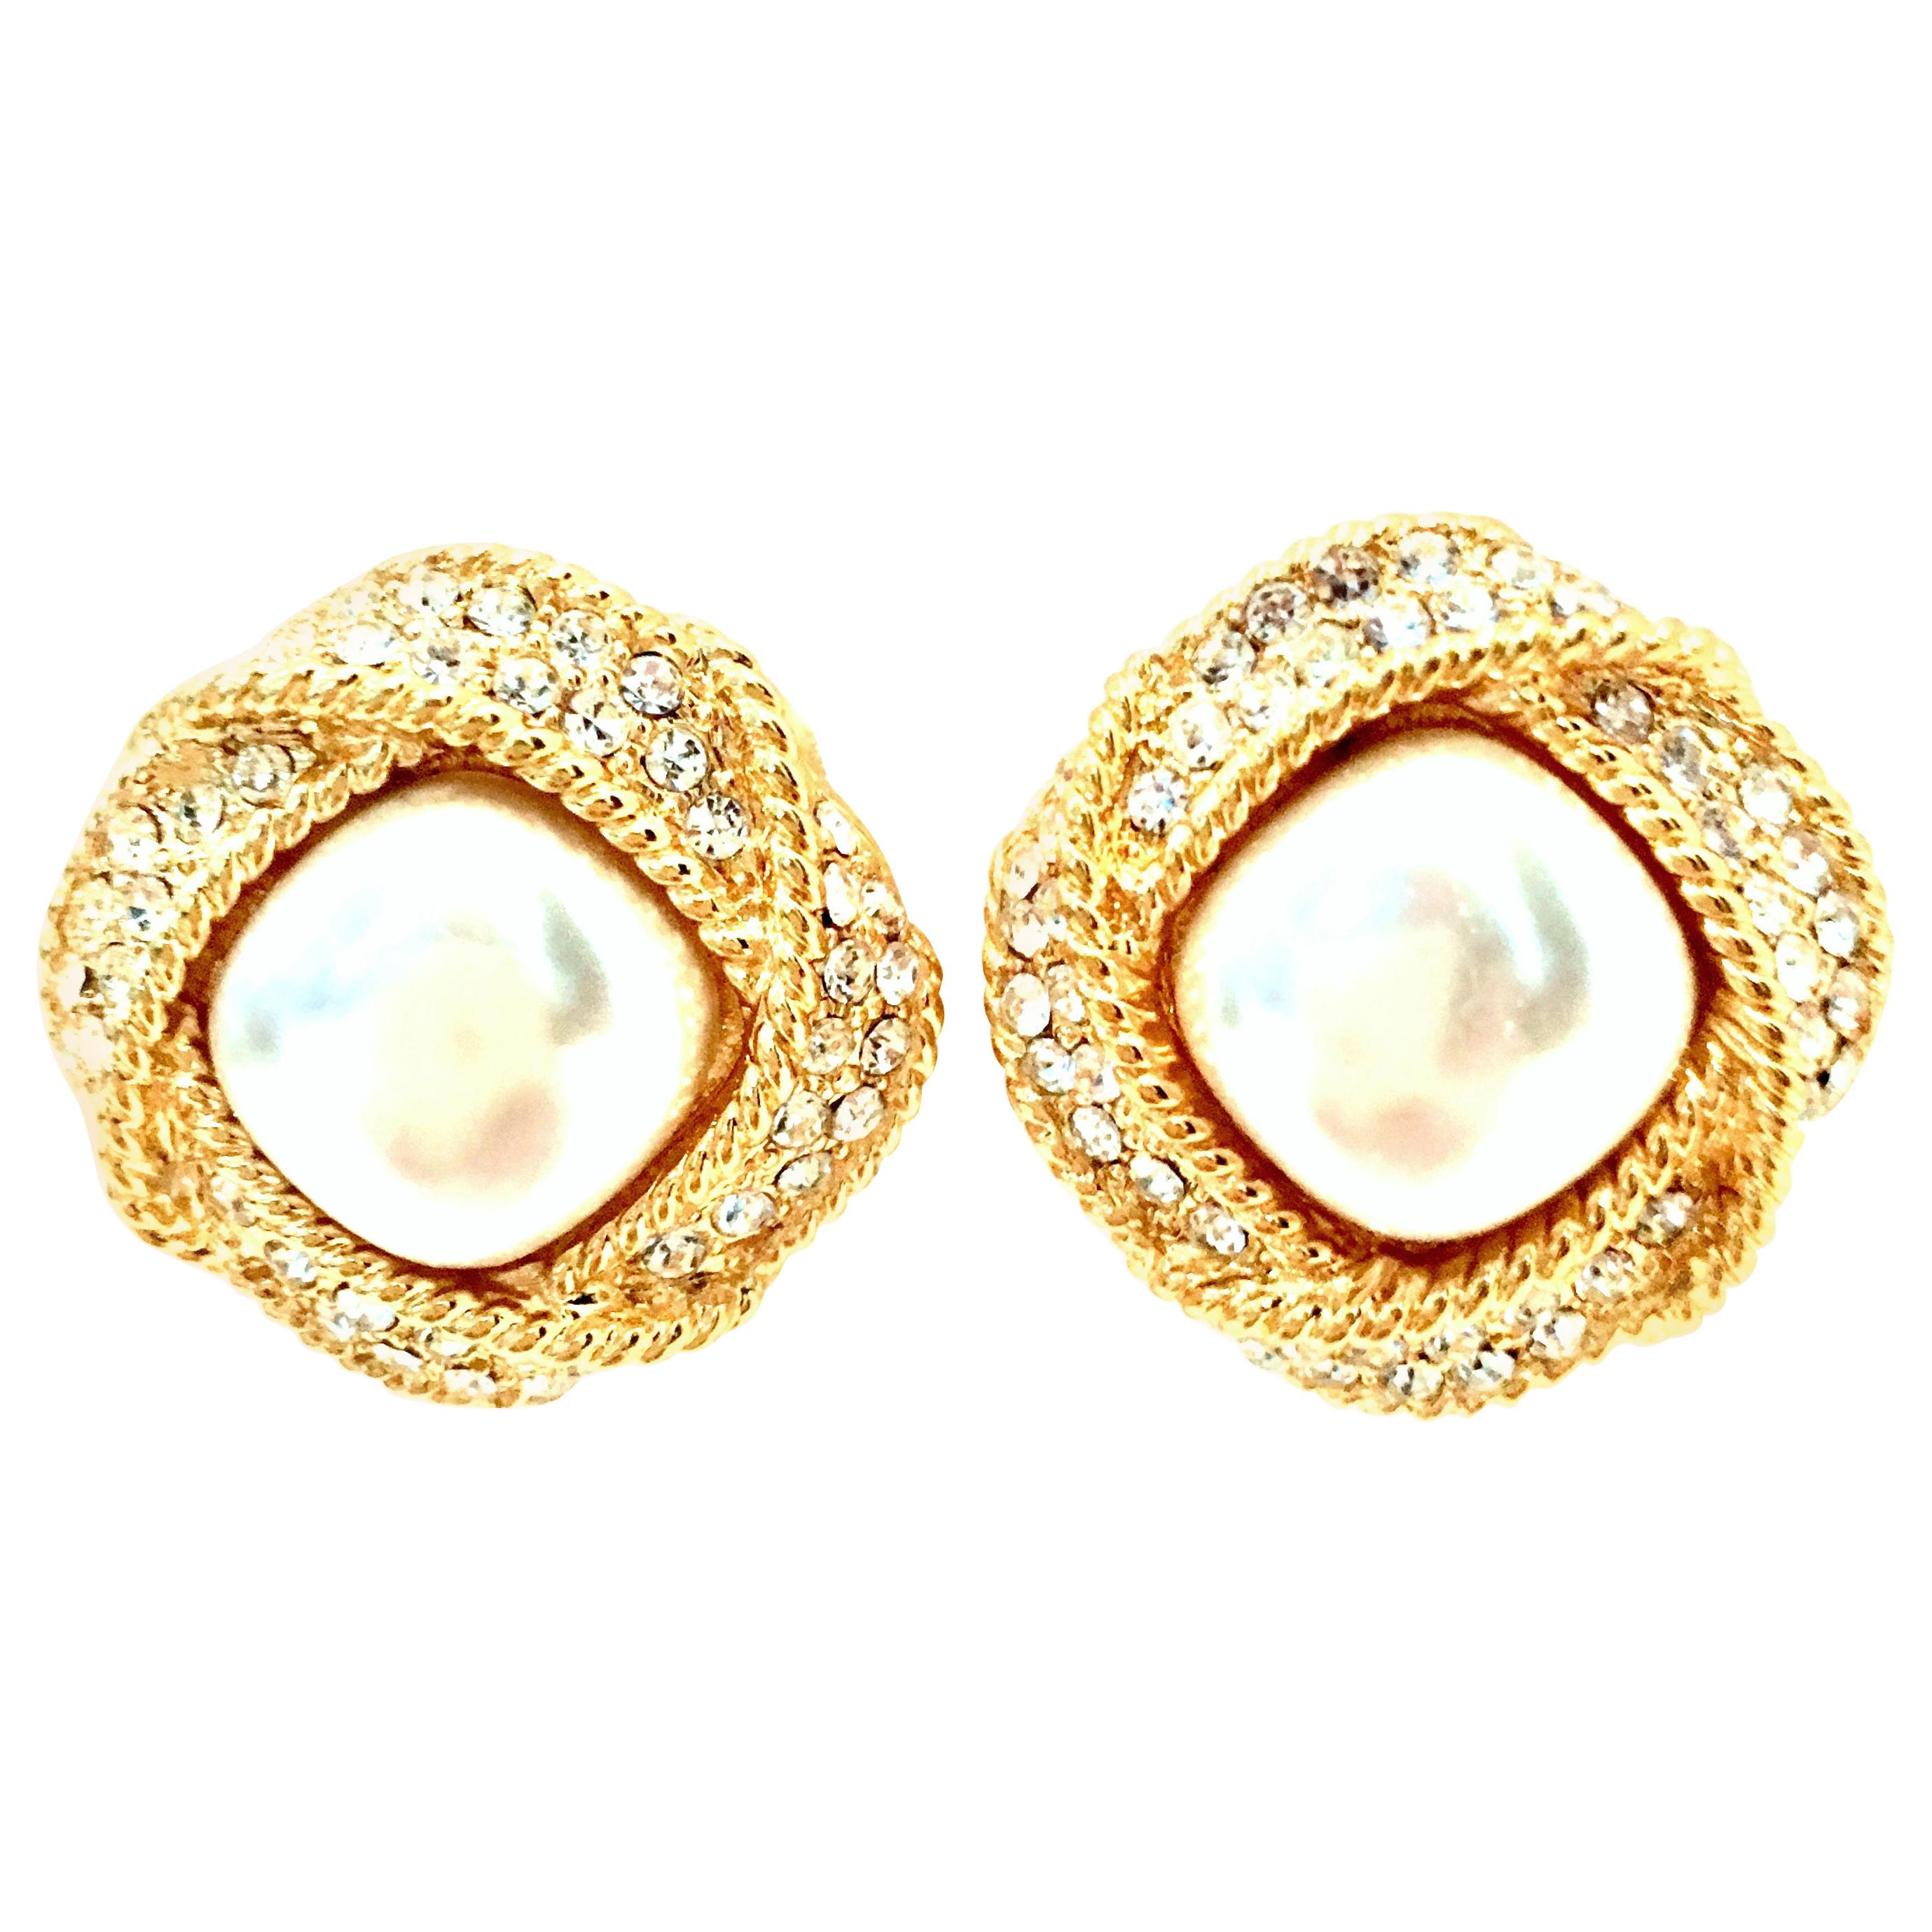 20th Century Pair Of Gold Faux Pearl & Austrian Crystal Earrings By, Napier For Sale